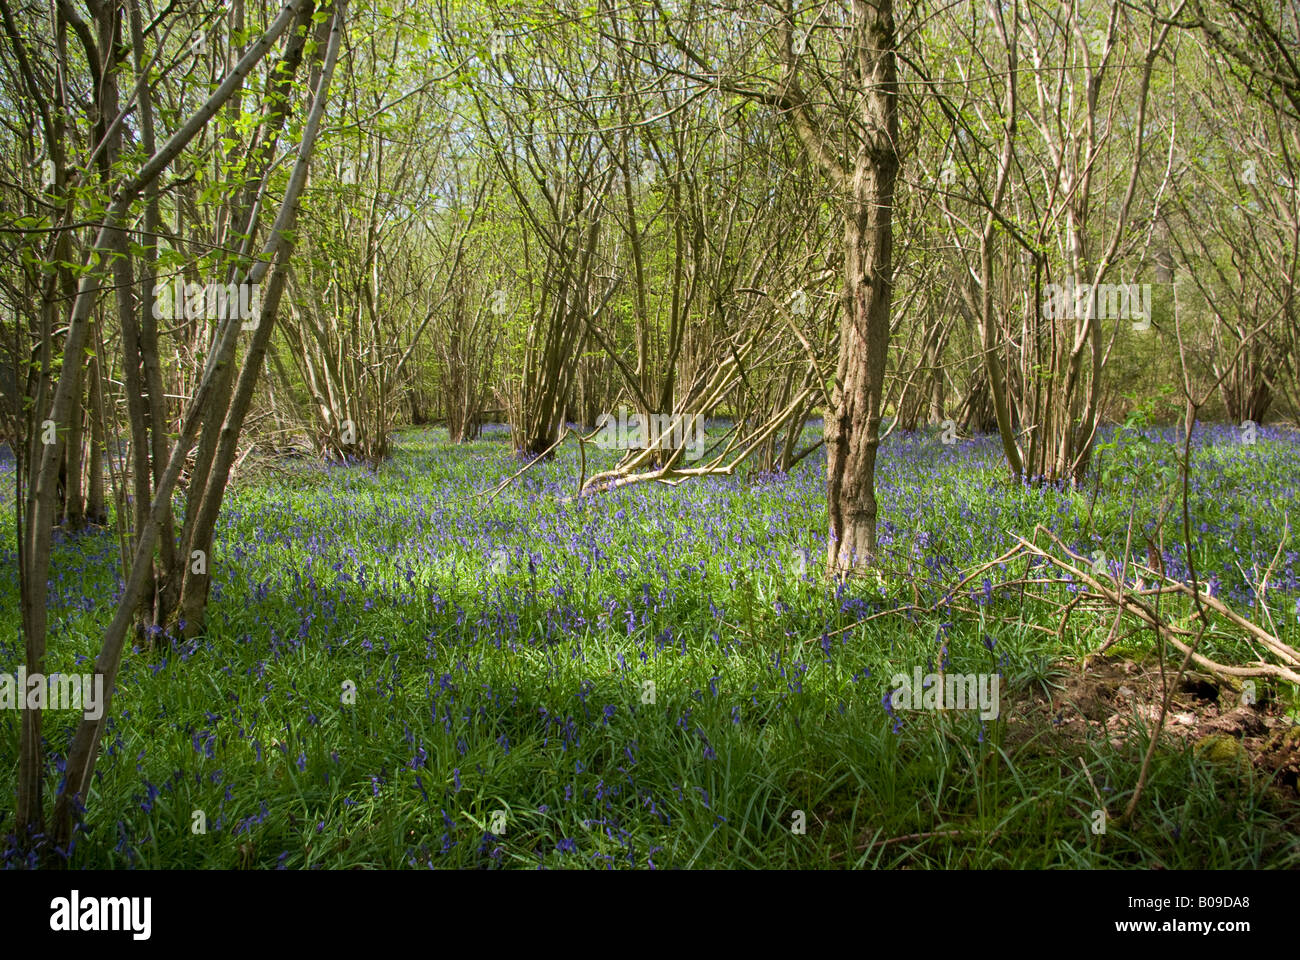 English Bluebells in spring Stock Photo